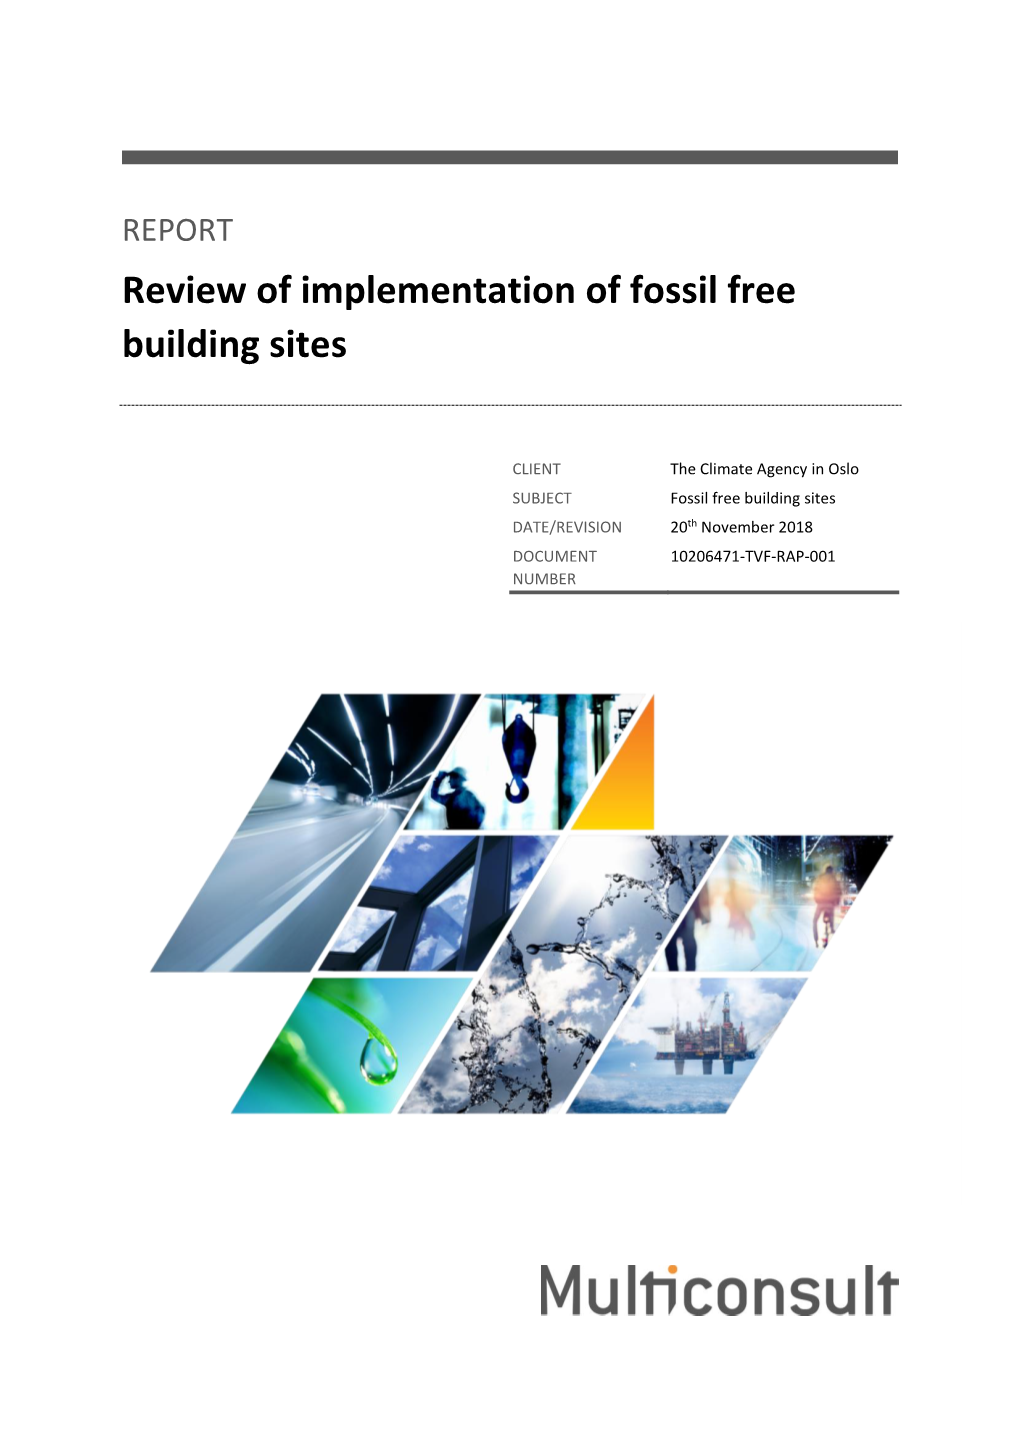 Review of Implementation of Fossil Free Building Sites